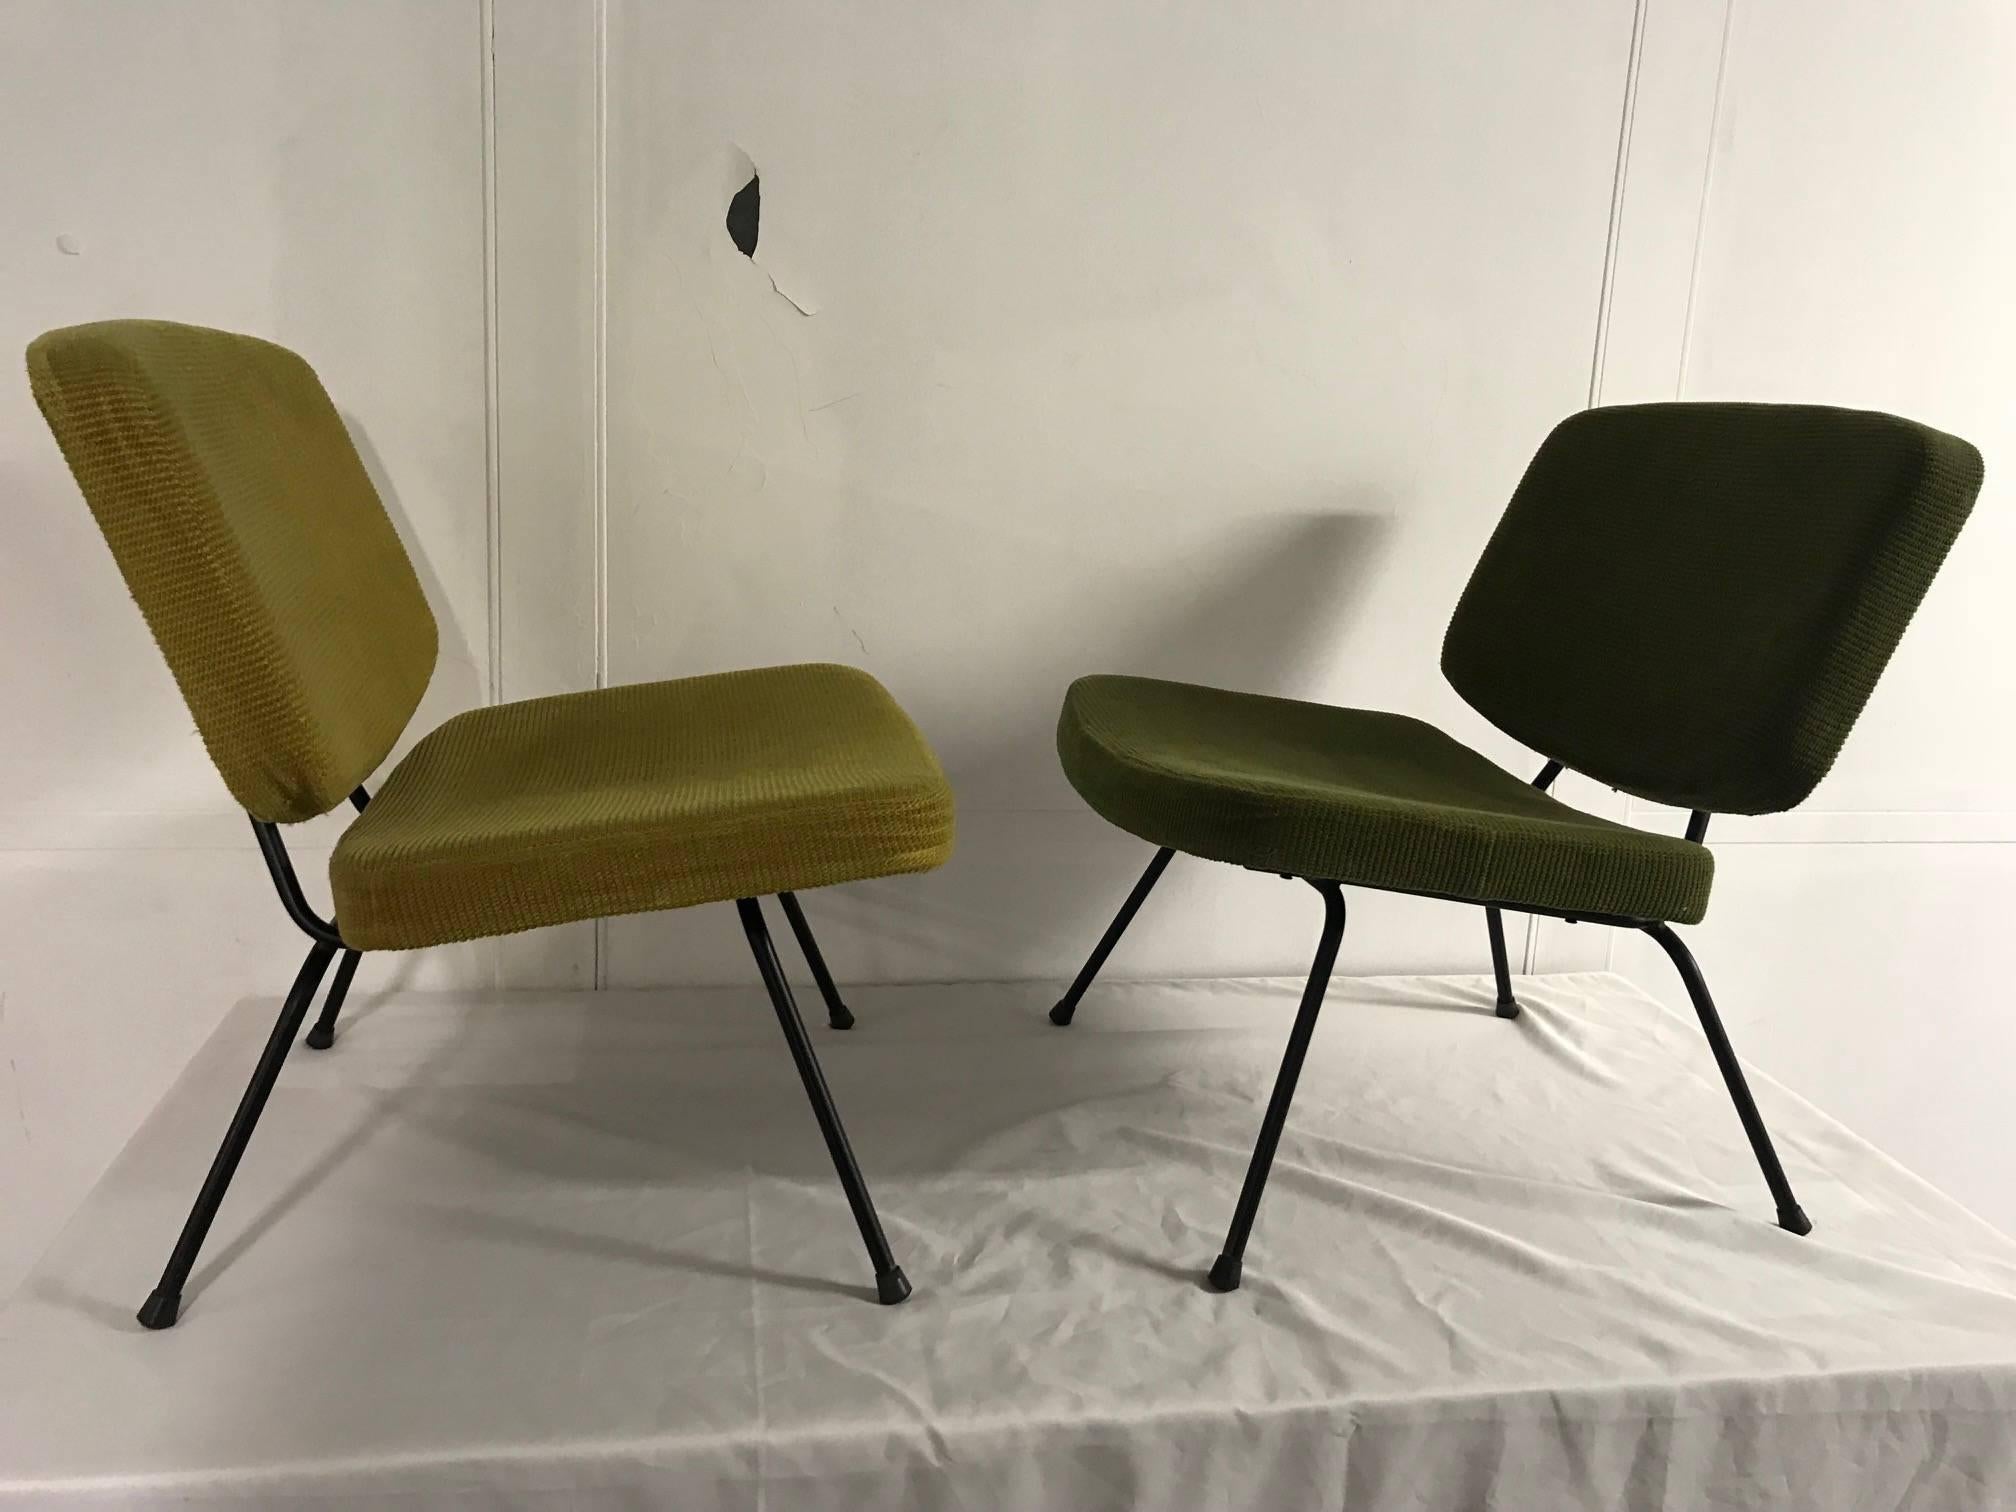 Pair of CM190 chairs by Pierre Paulin, France, Thonet editions.